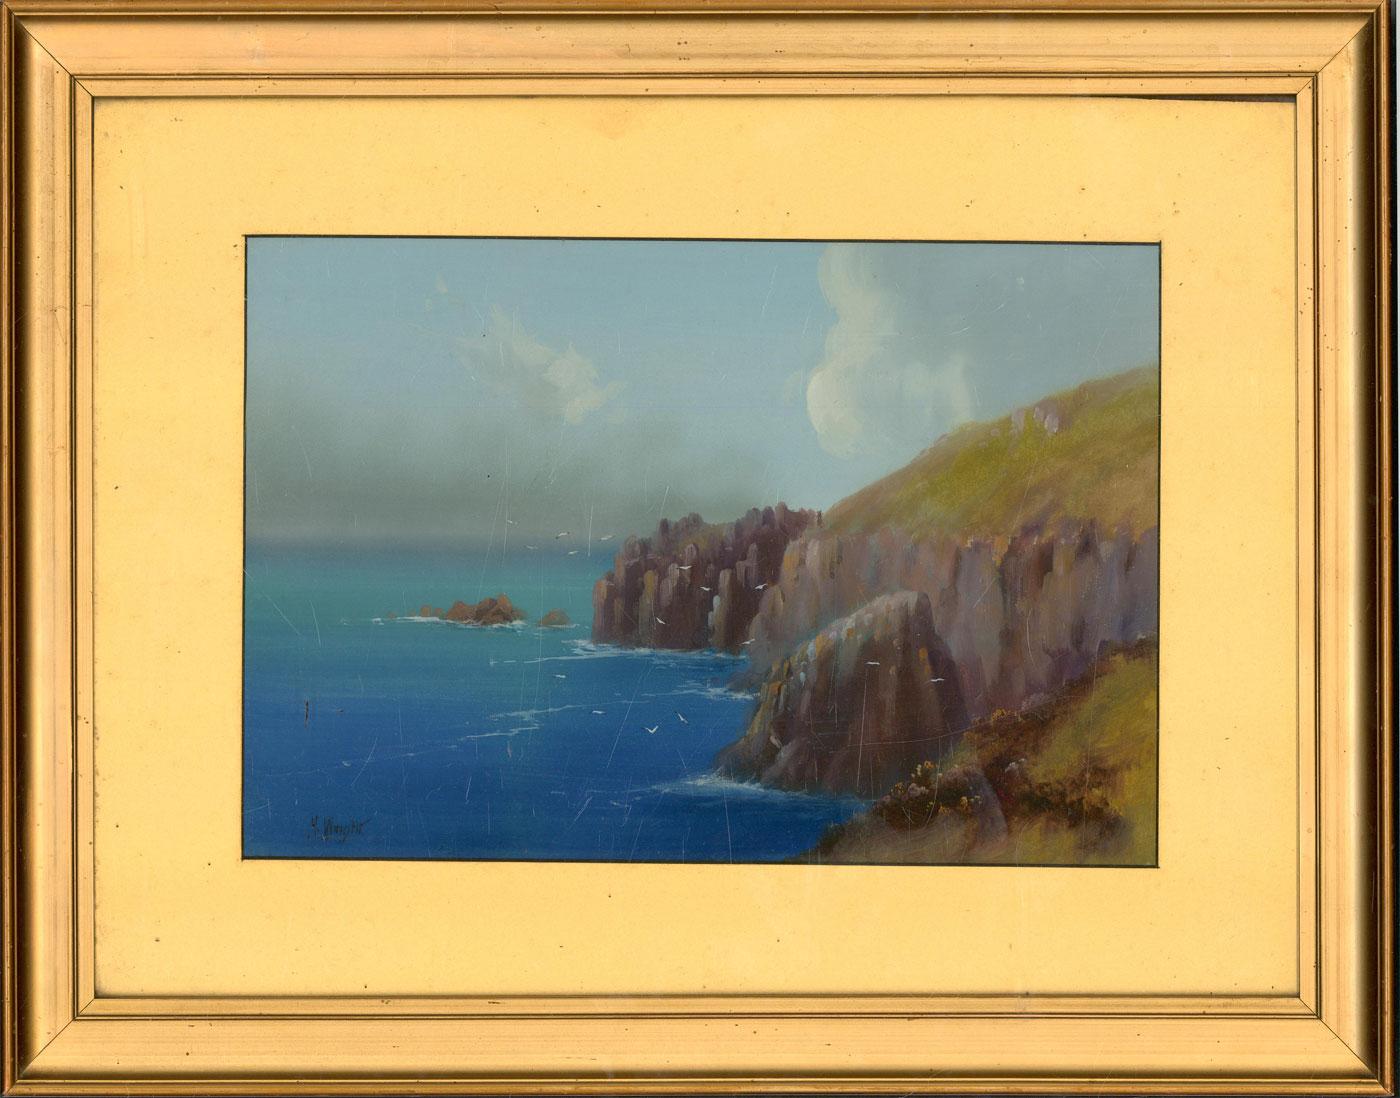 An alluring coastal scene is depicted in this gouache painting.

Signed.

Well presented in a field molded wood frame with a gilded mount.

On wove.